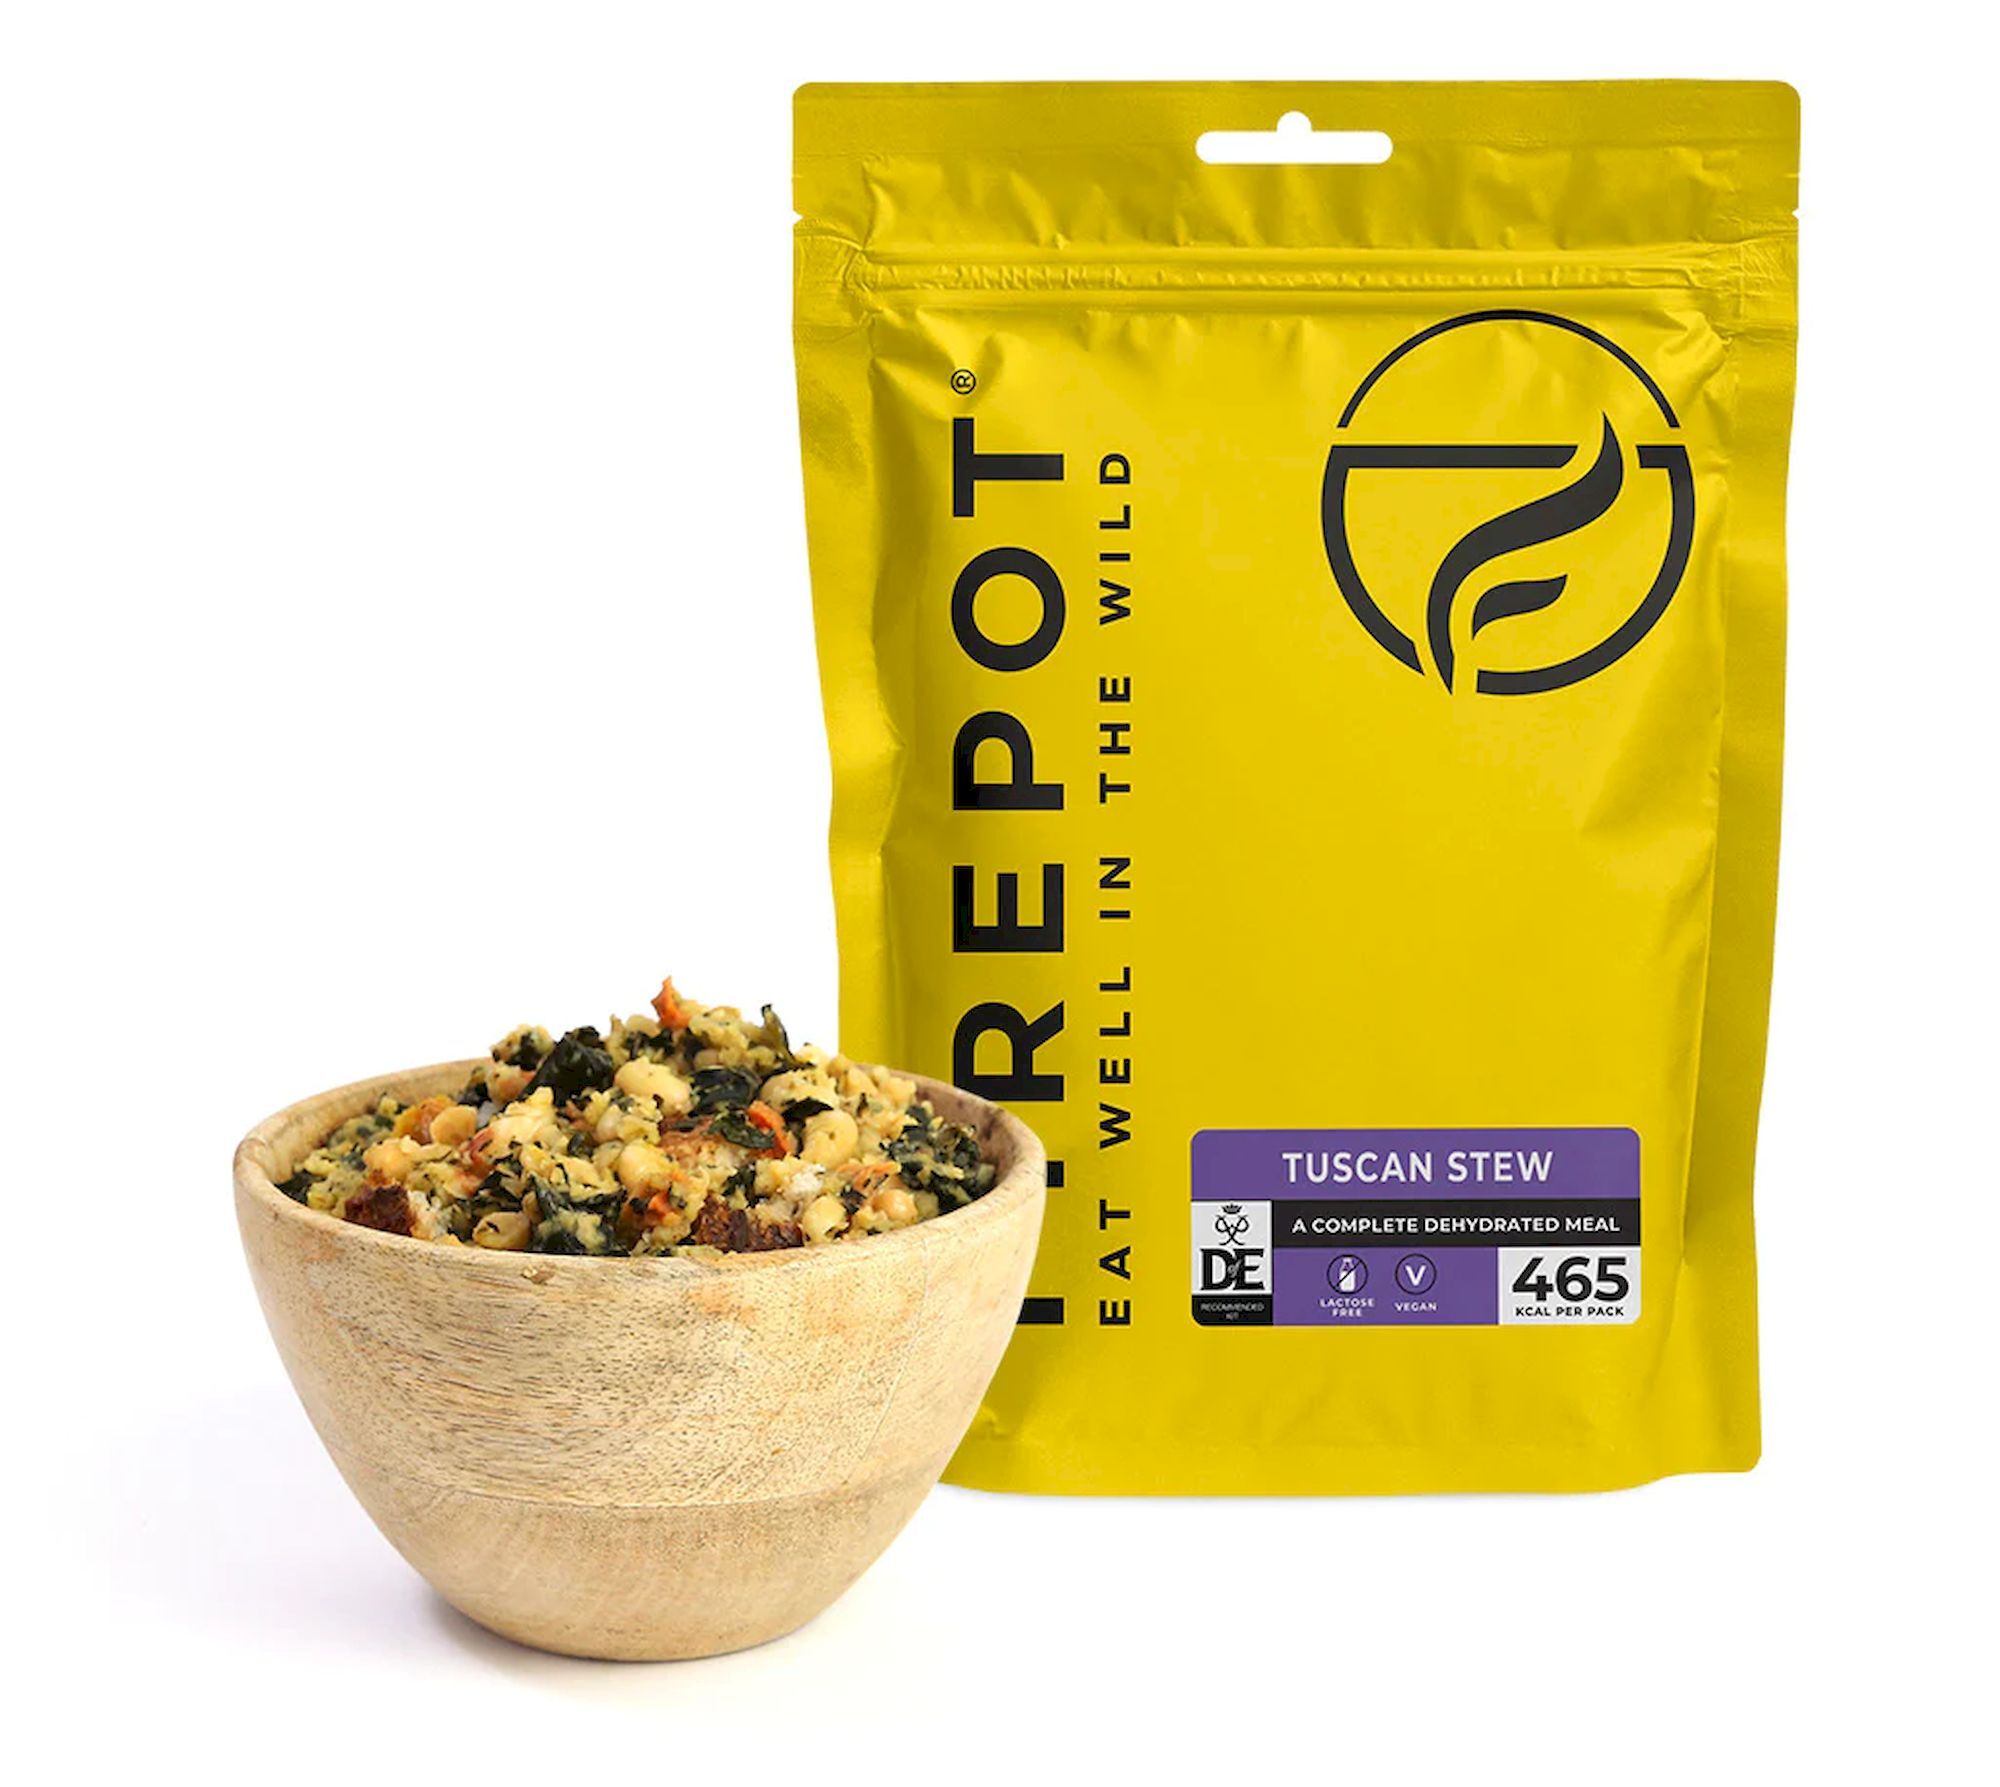 Firepot Tuscan Stew - Freeze-dried meals | Hardloop